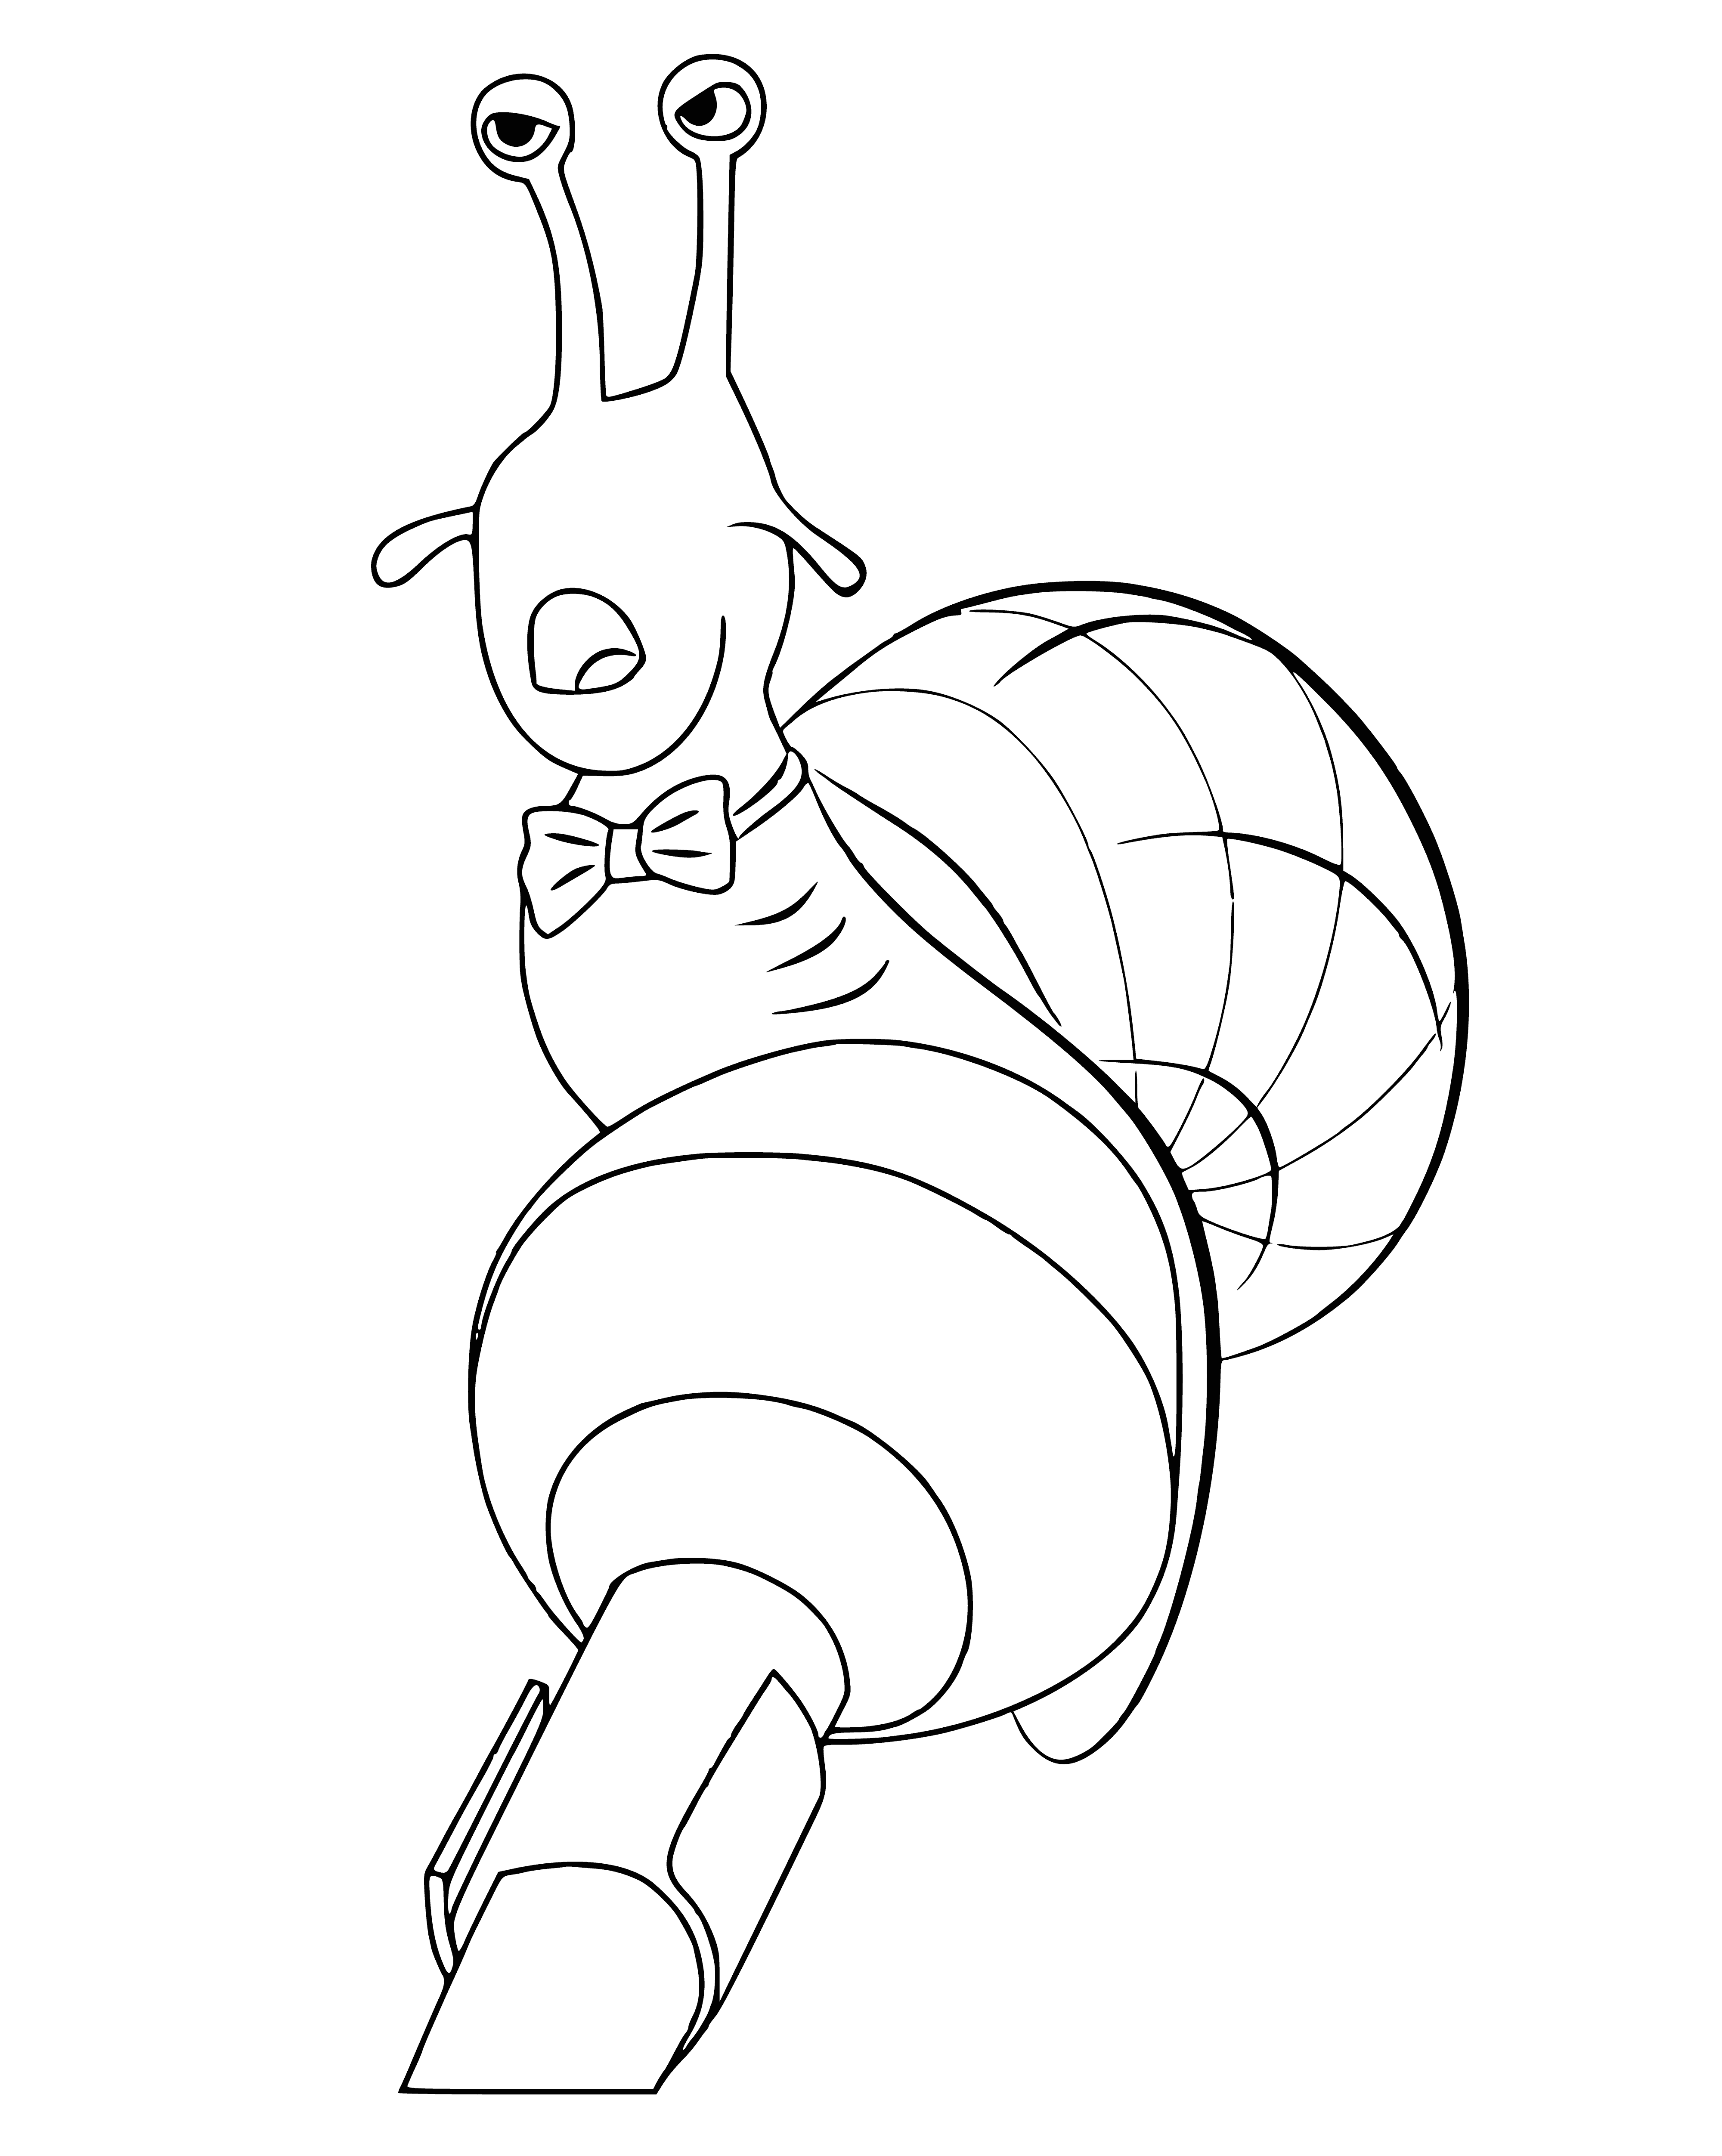 Snail Raymond coloring page